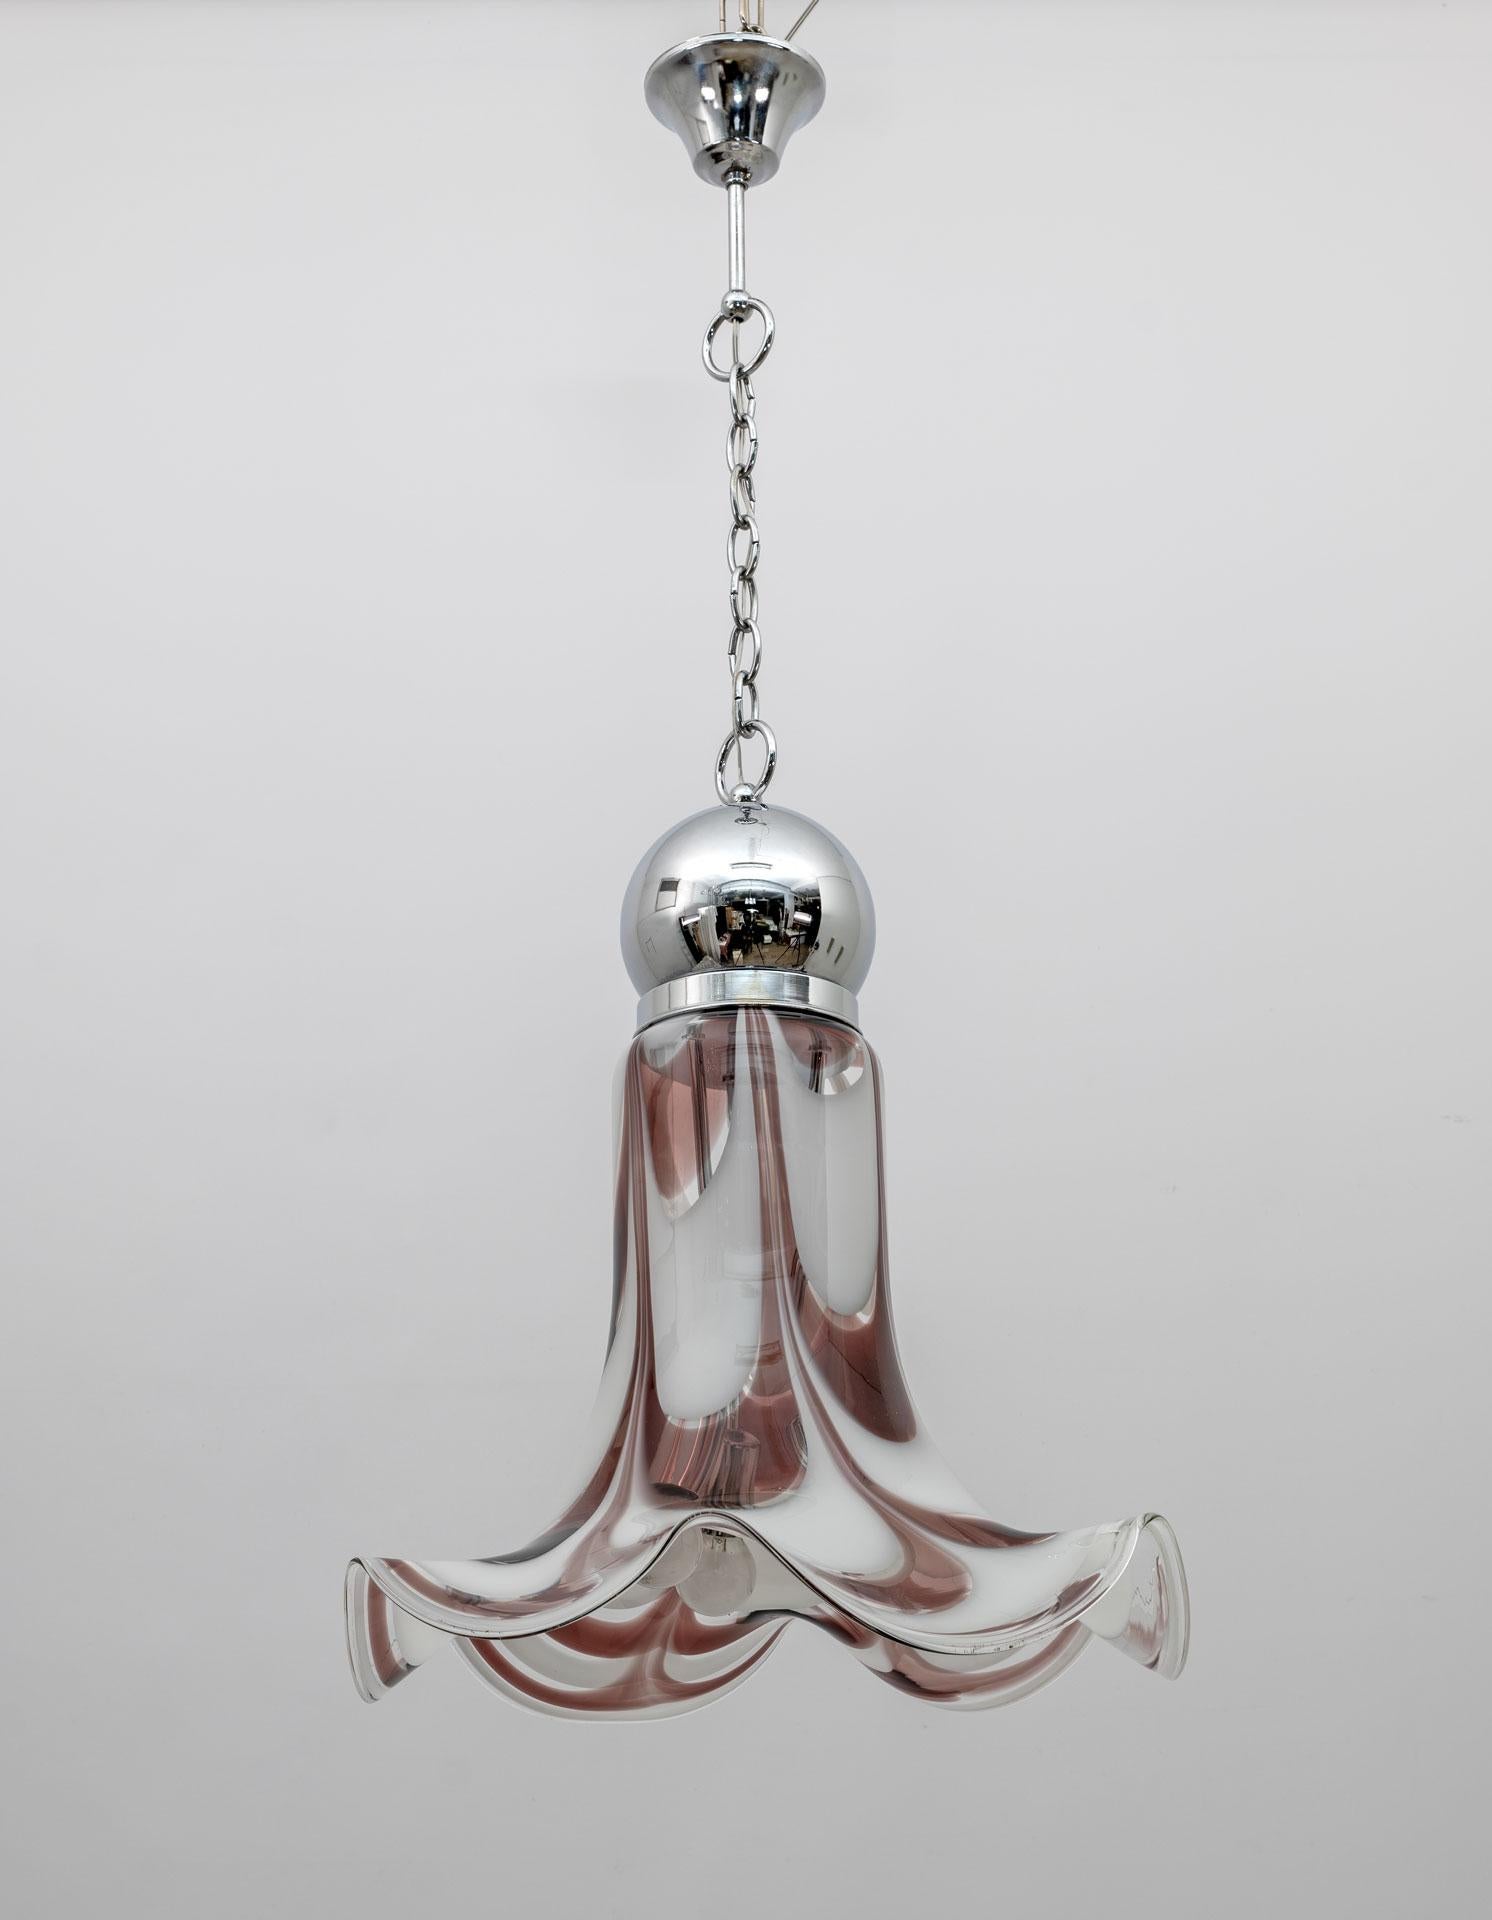 This ceiling chandelier is characterized by a bell-shaped lampshade in white and brick red Murano glass and chromed metal, produced by the AVMazzega glassworks in the 70s